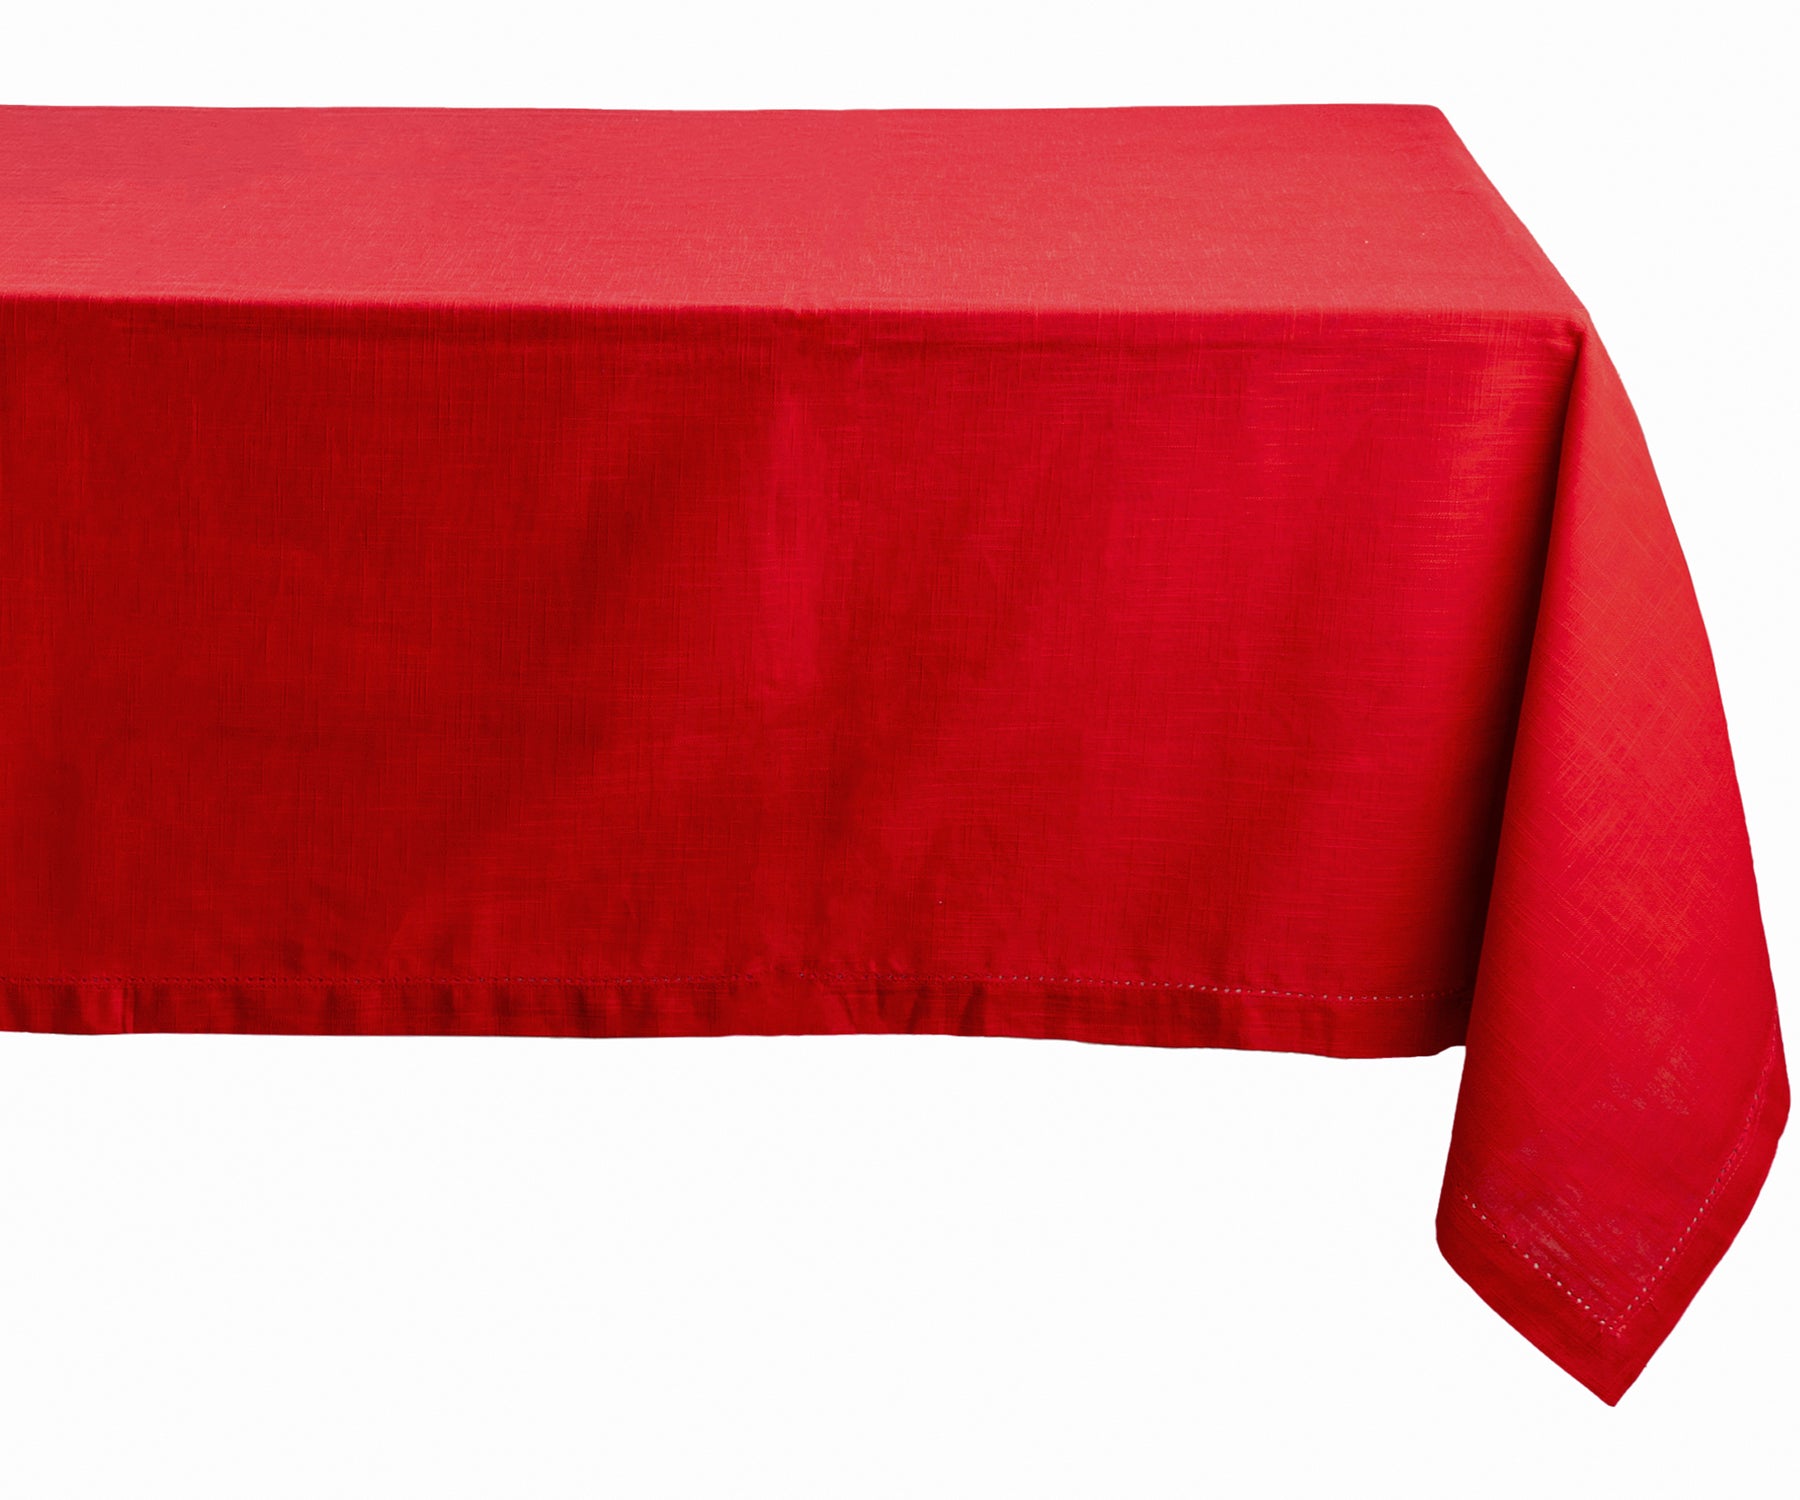 "Infuse warmth with red, elevate with fabric textures, and celebrate Christmas joy with our diverse tablecloth assortment."